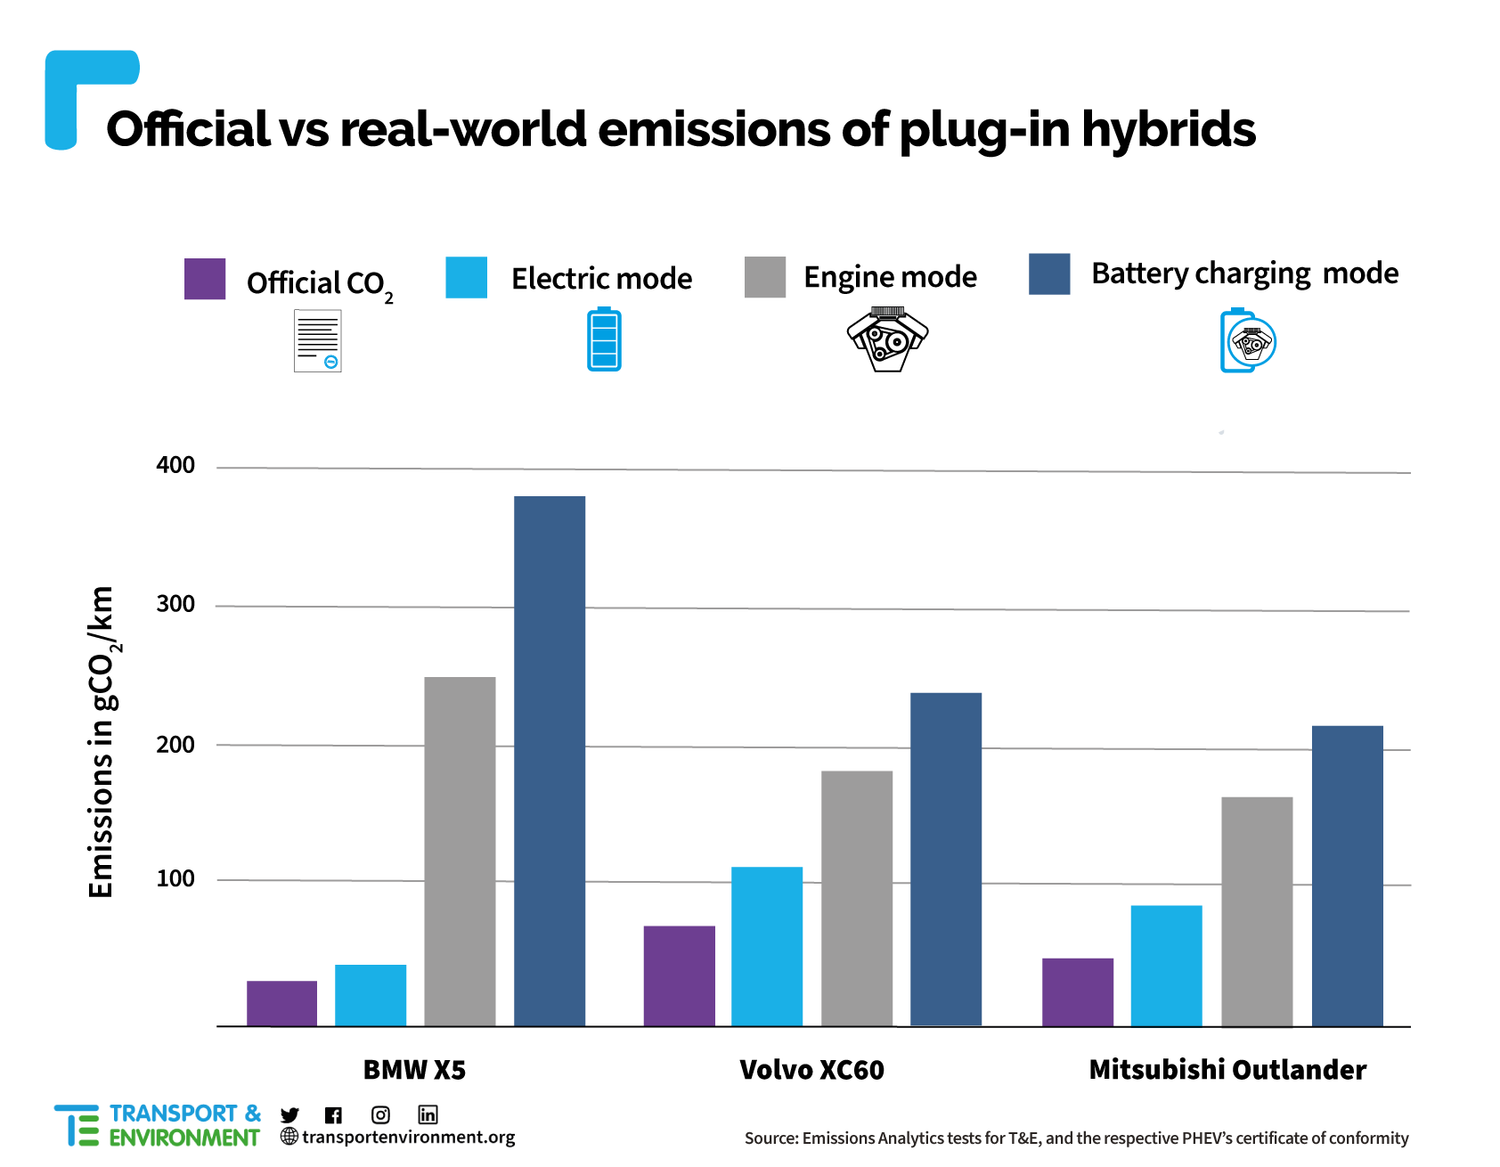 Tesla BEVs Have Zero Emissions While Plug-in Hybrids Can Emit up to 12X More CO2 than Advertised